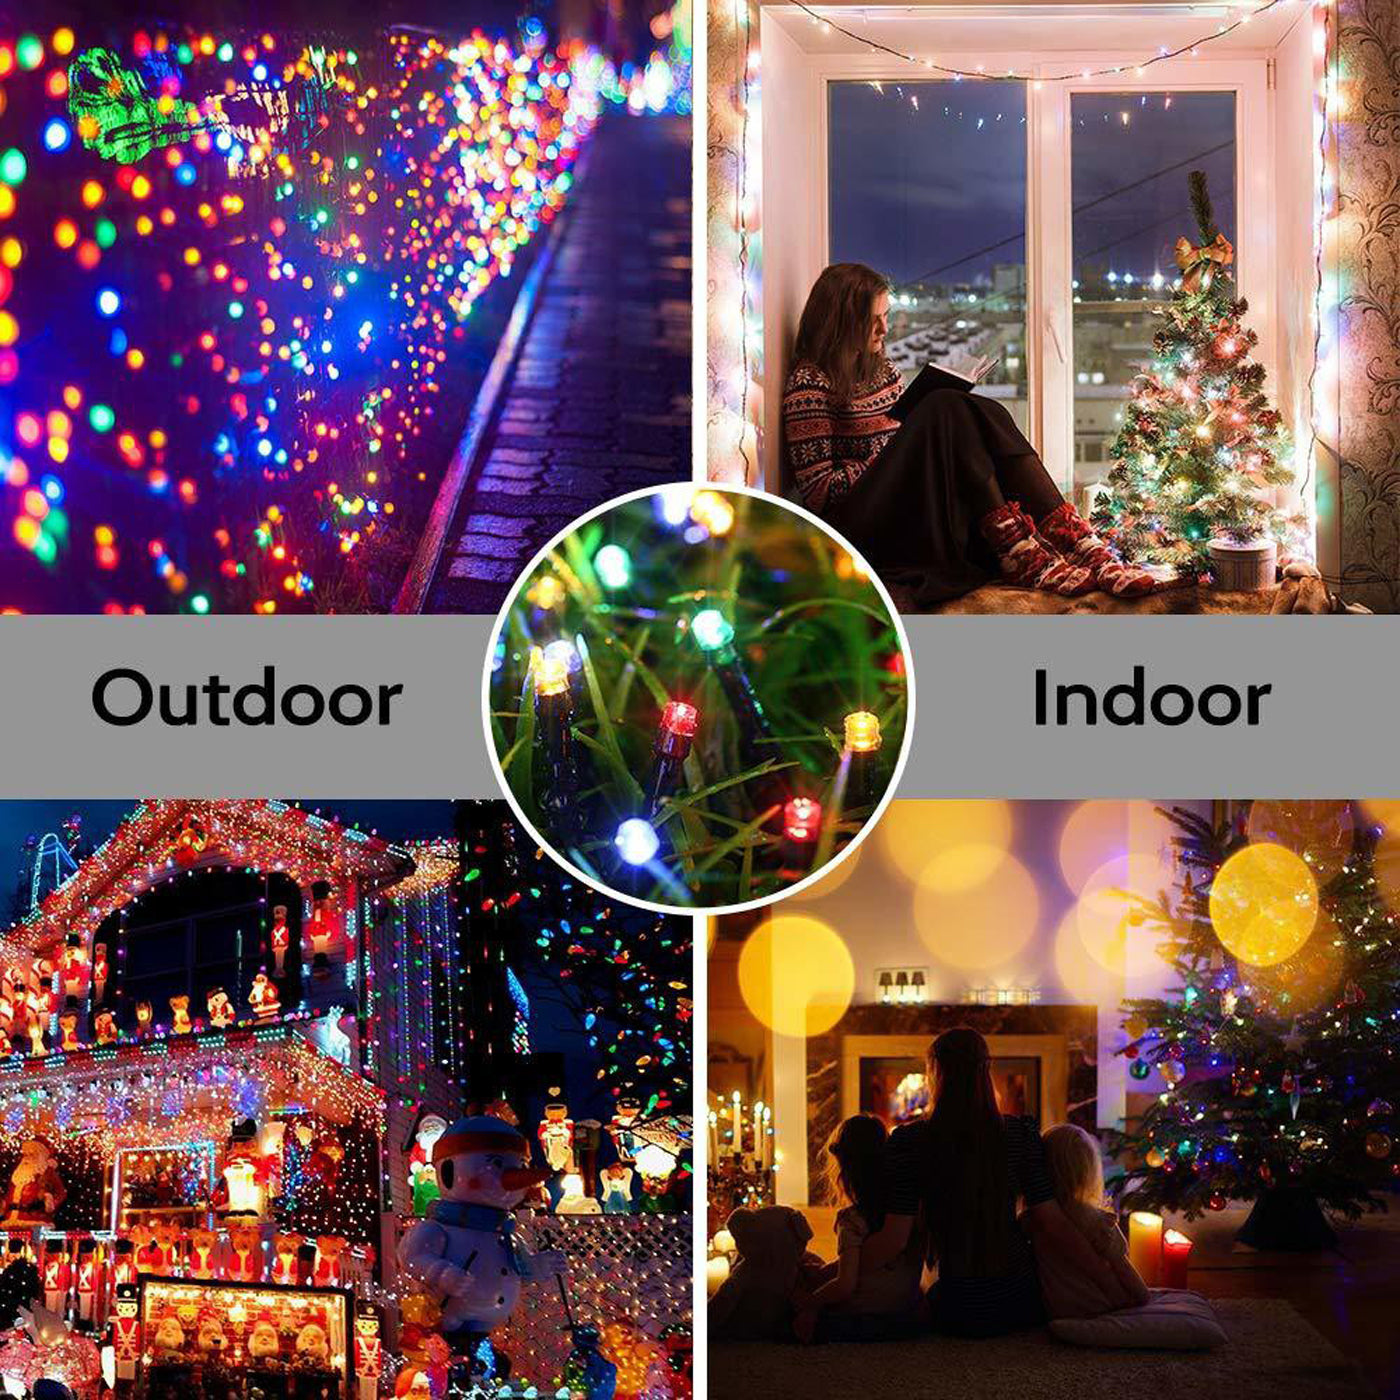 DecorTwist LED String Light for Home and Office Decor| Indoor & Outdoor Decorative Lights|Christmas |Diwali |Wedding | Christmas | Diwali | Wedding |16 Meter Length (16 MTR, 1)